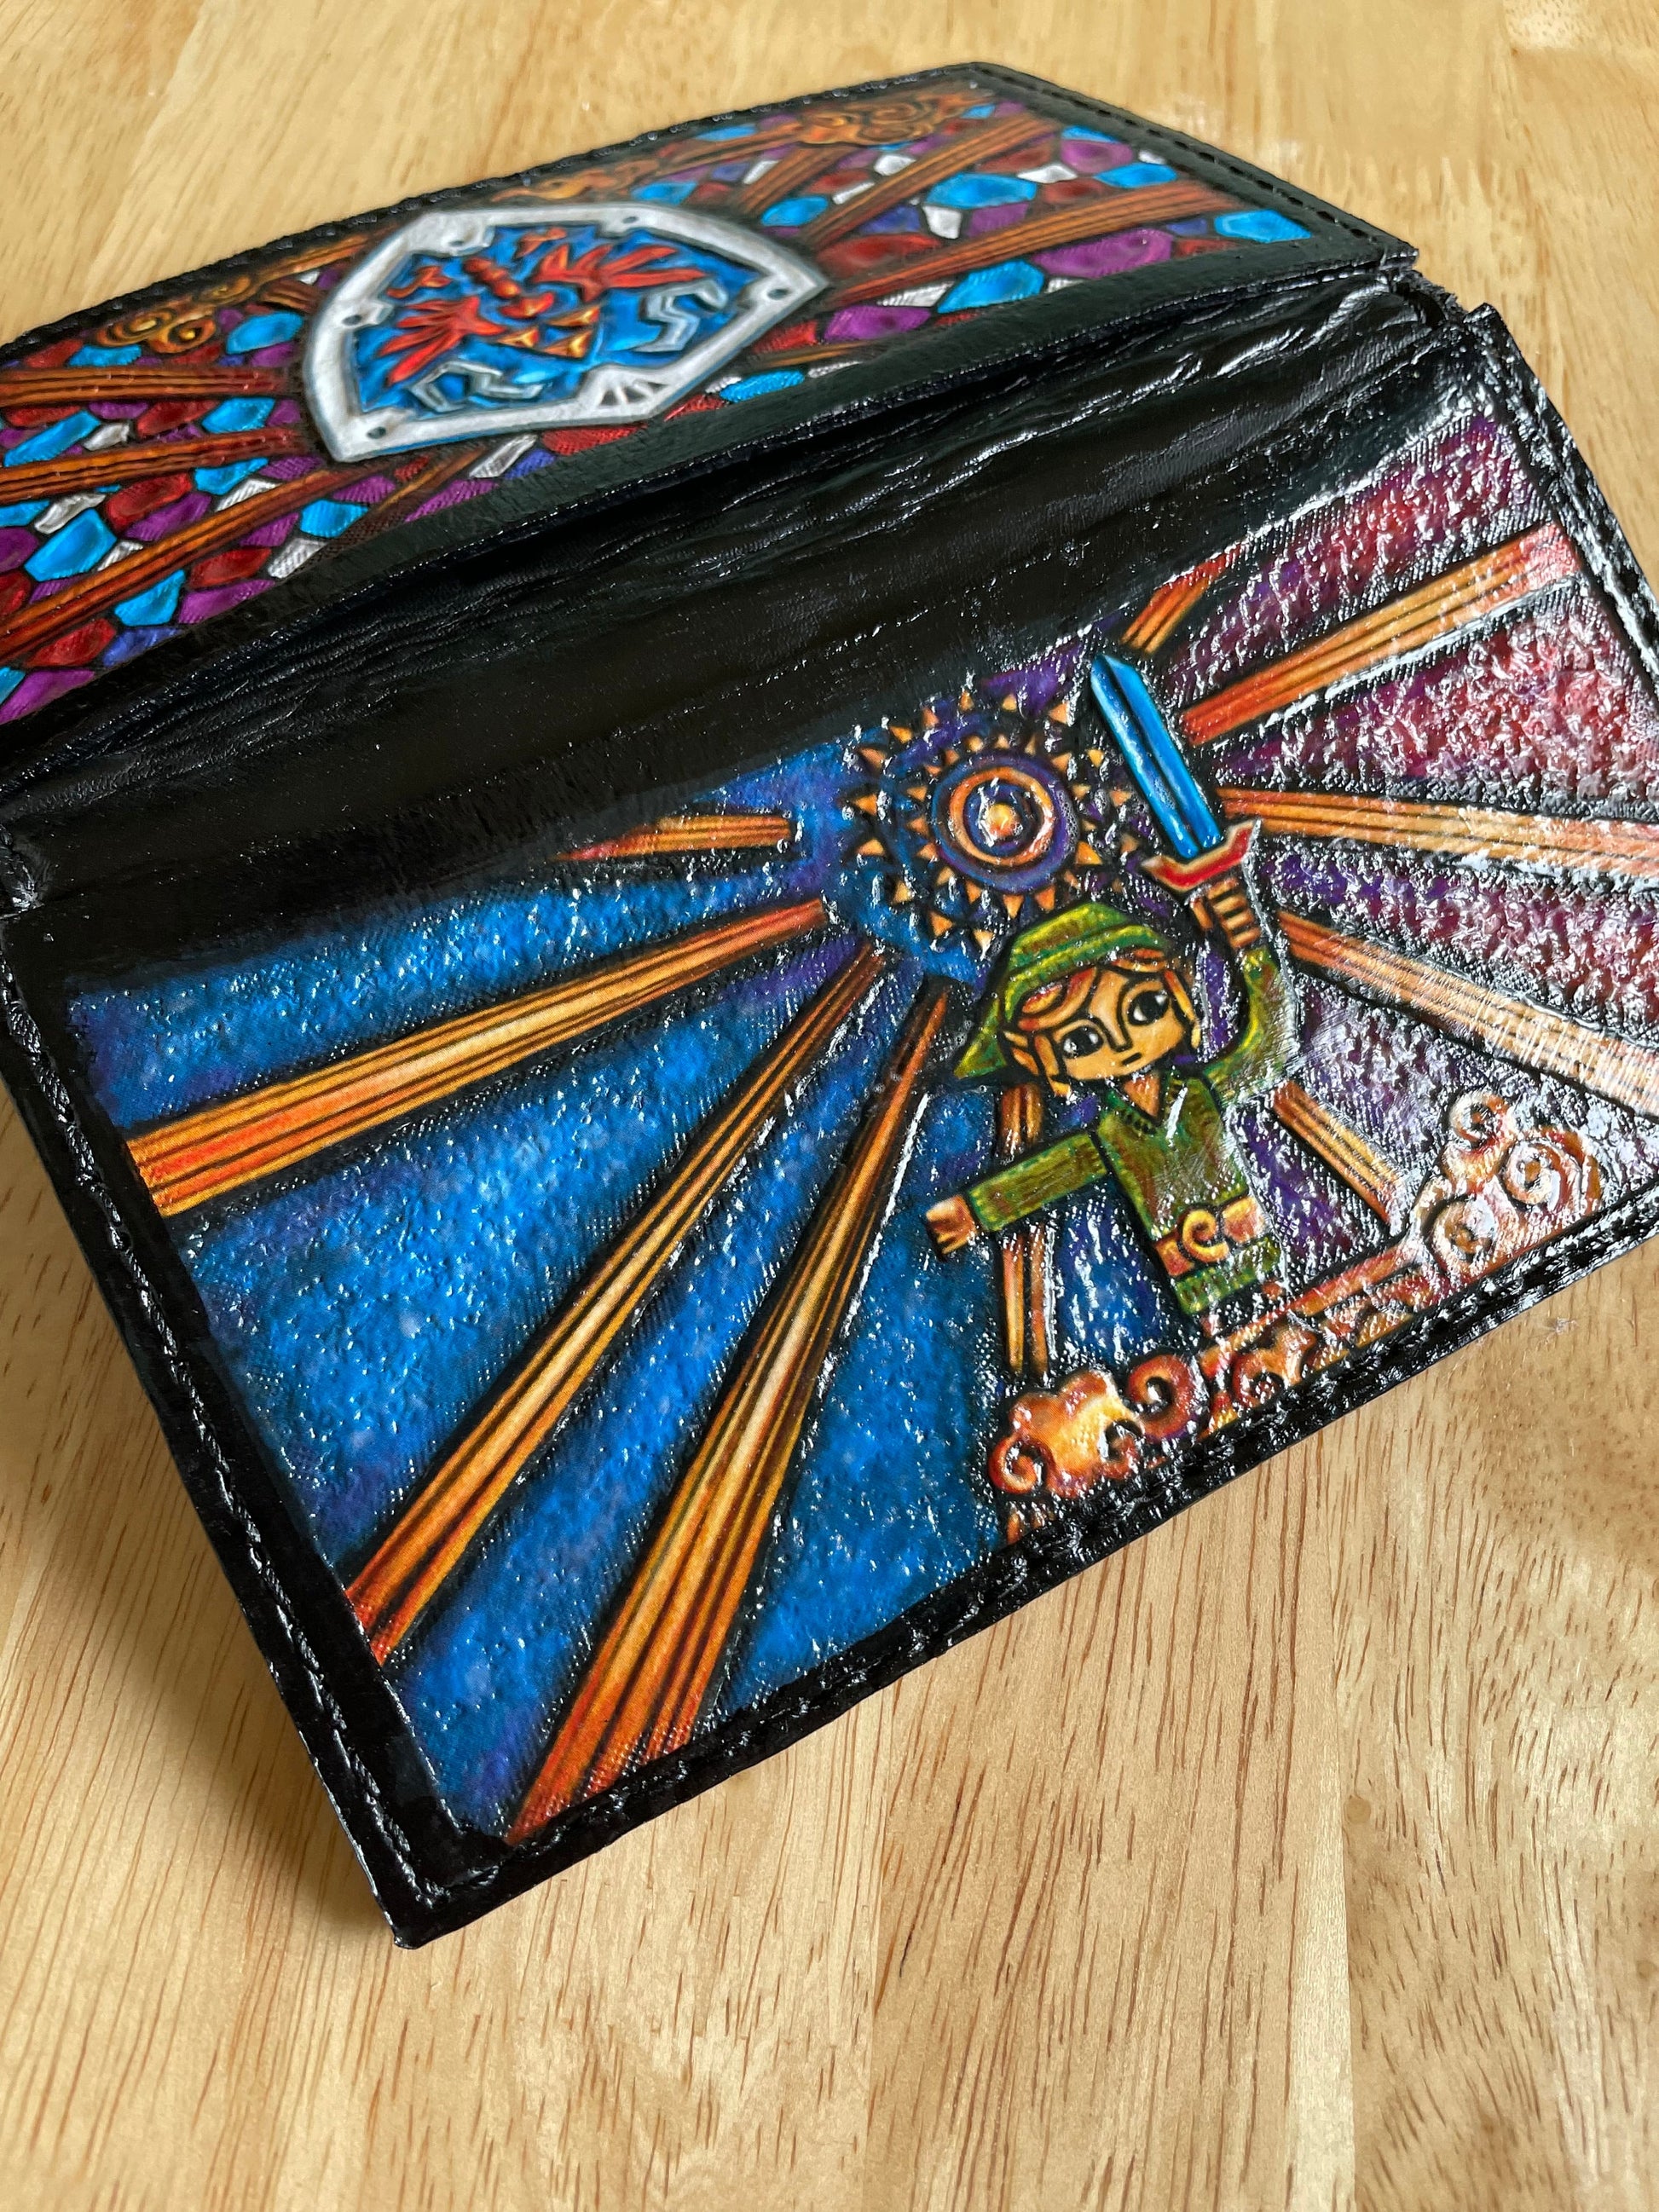 Windwaker - Long Purse/wallet 18 card holders + more - Hyrule Shield stained glass- Leather - Handcrafted Zelda inspired Long Wallet -